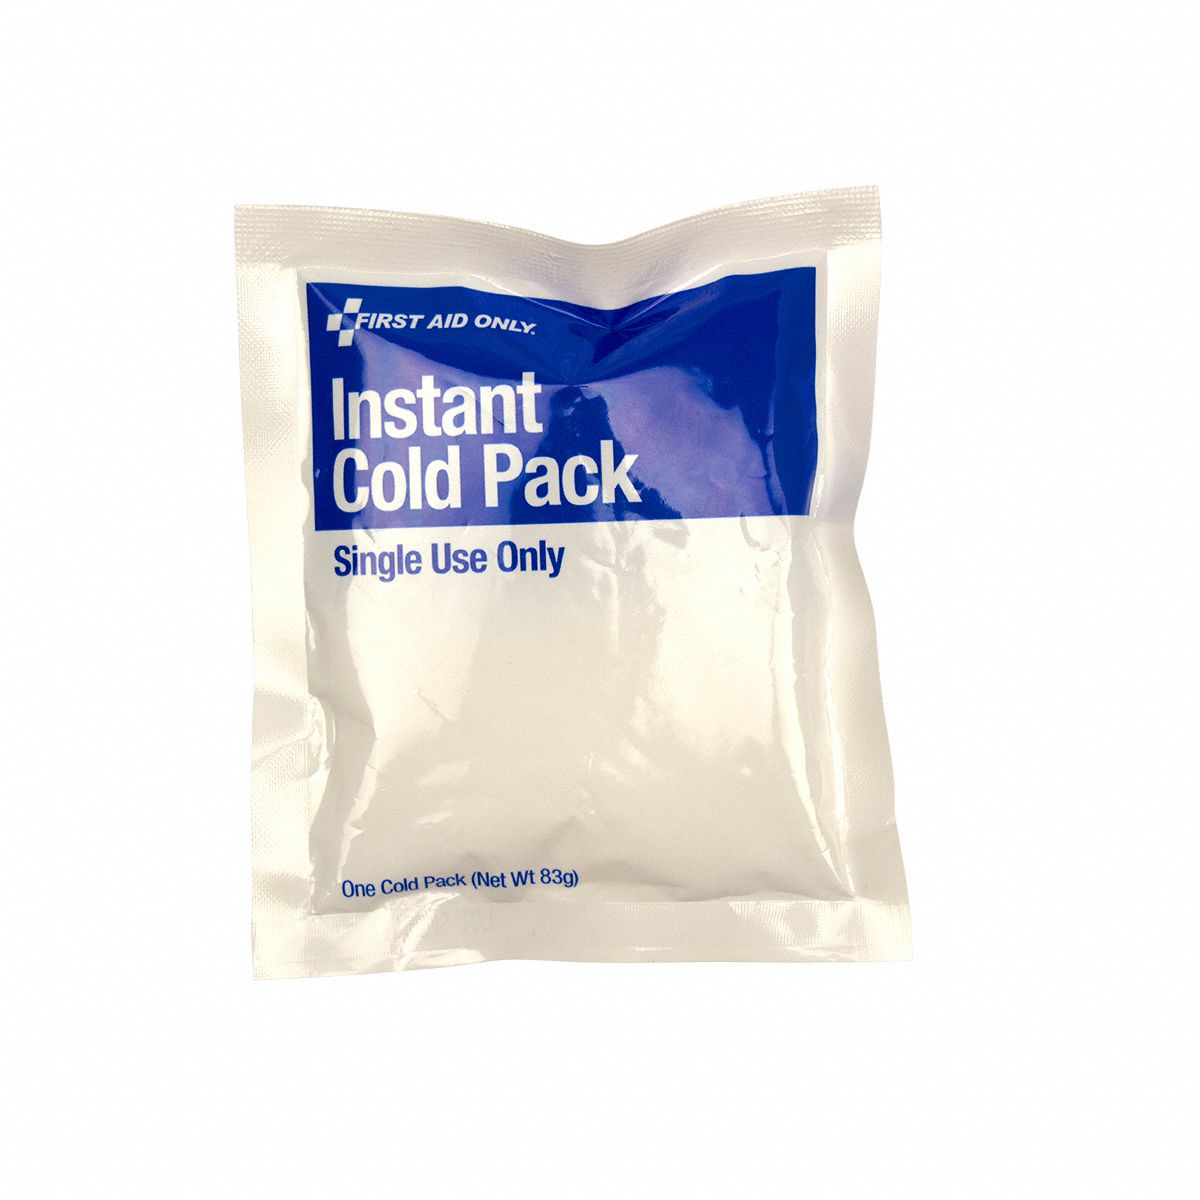 FIRST AID ONLY, Disposable, White, Instant Cold Pack - 39P019